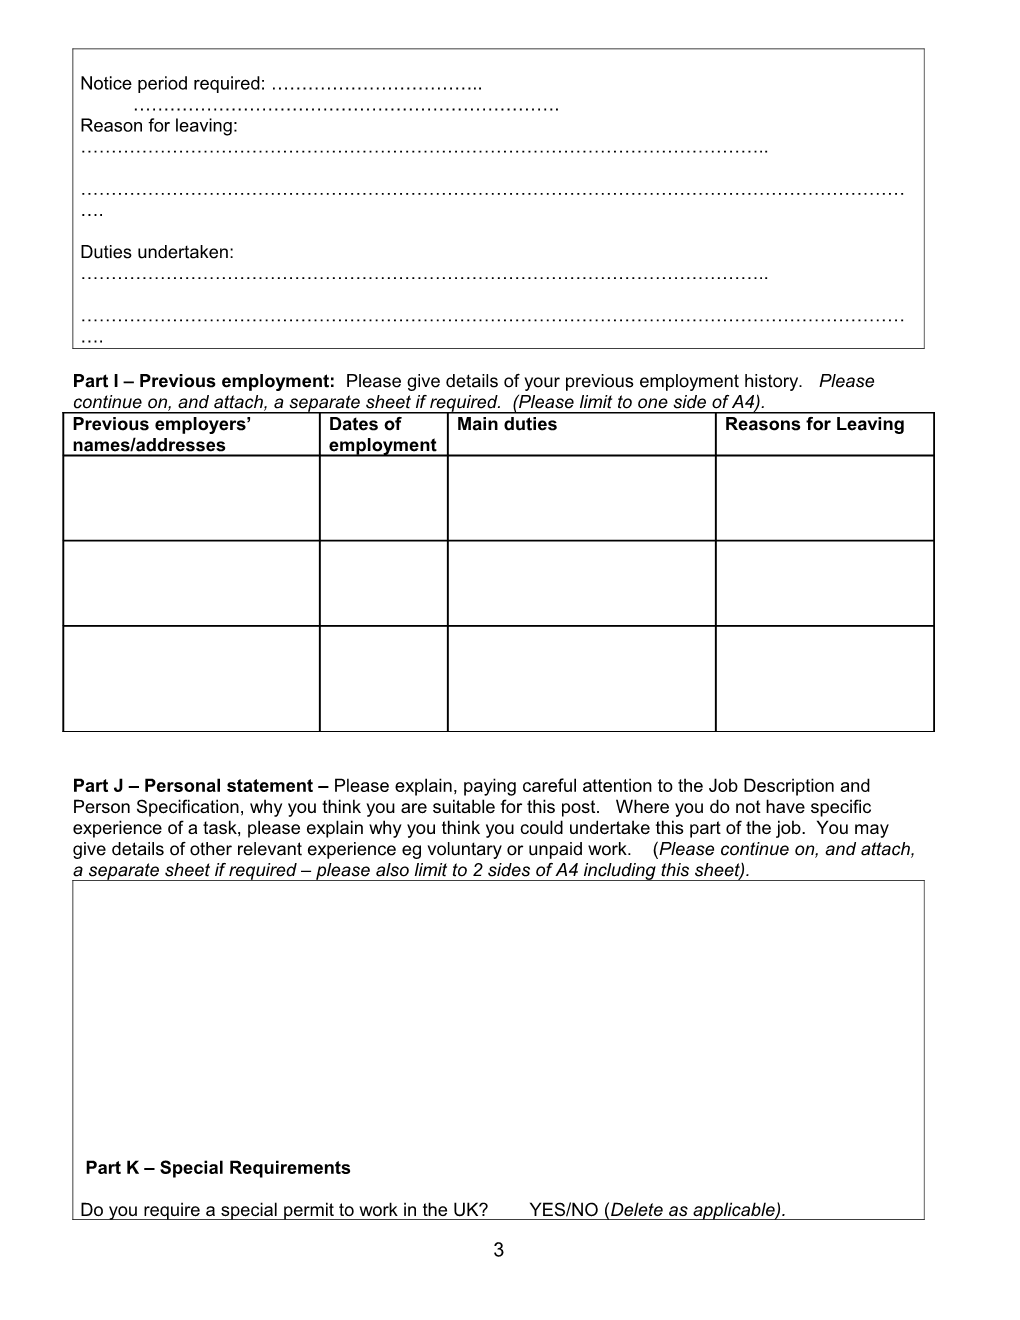 Employment Application Form for the Post Of:Employability Programme Manager